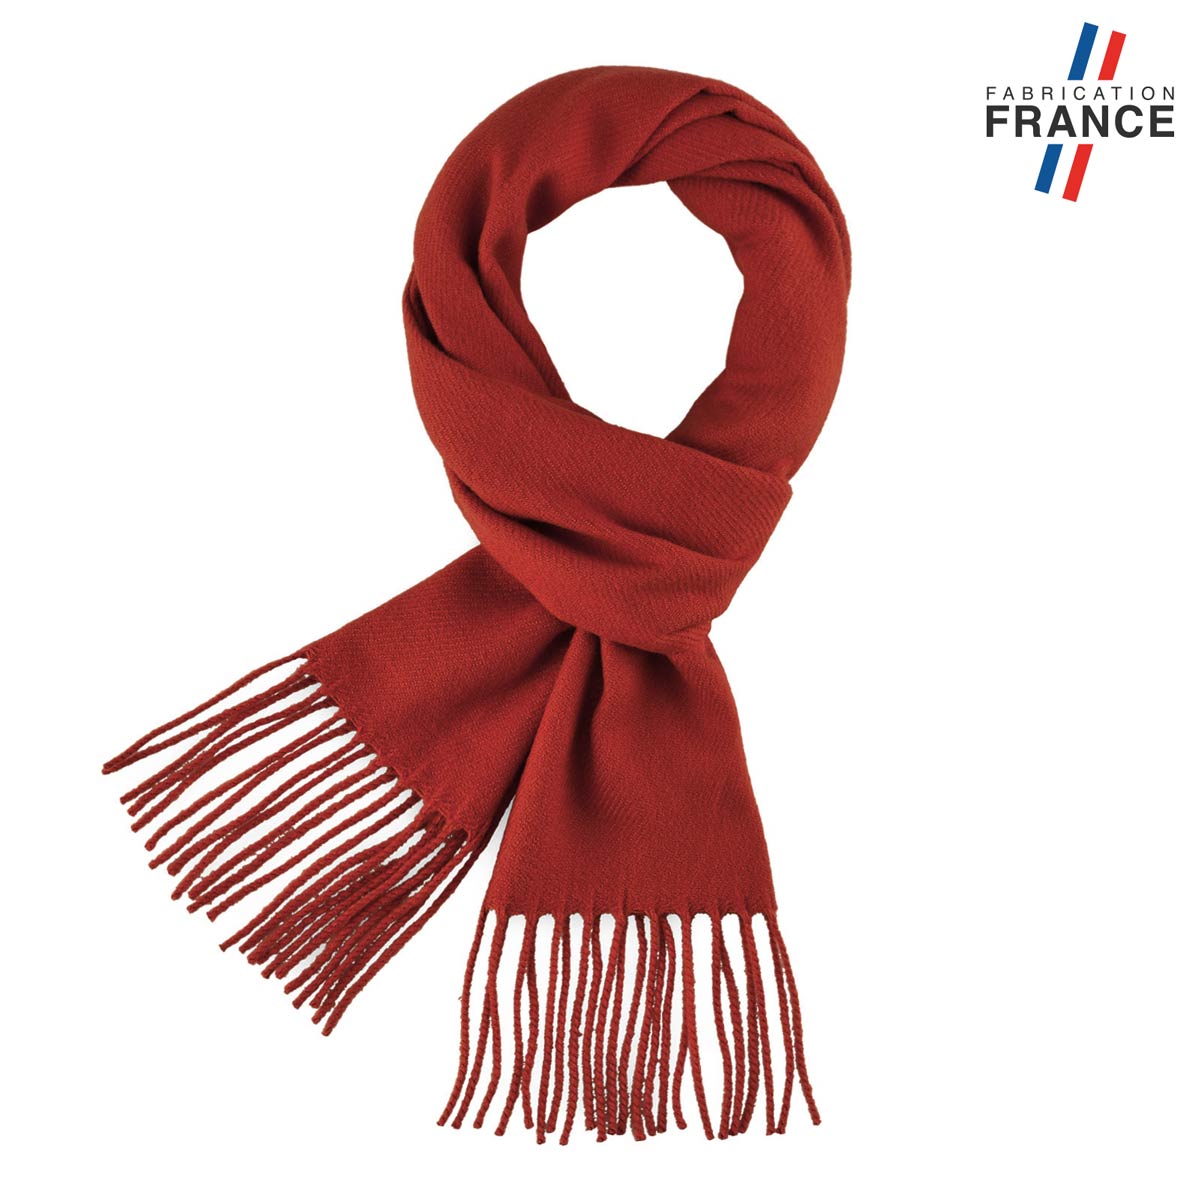 AT-06572_F12-1FR_Echarpe-franges-rouge-baisers-fabrication-francaise